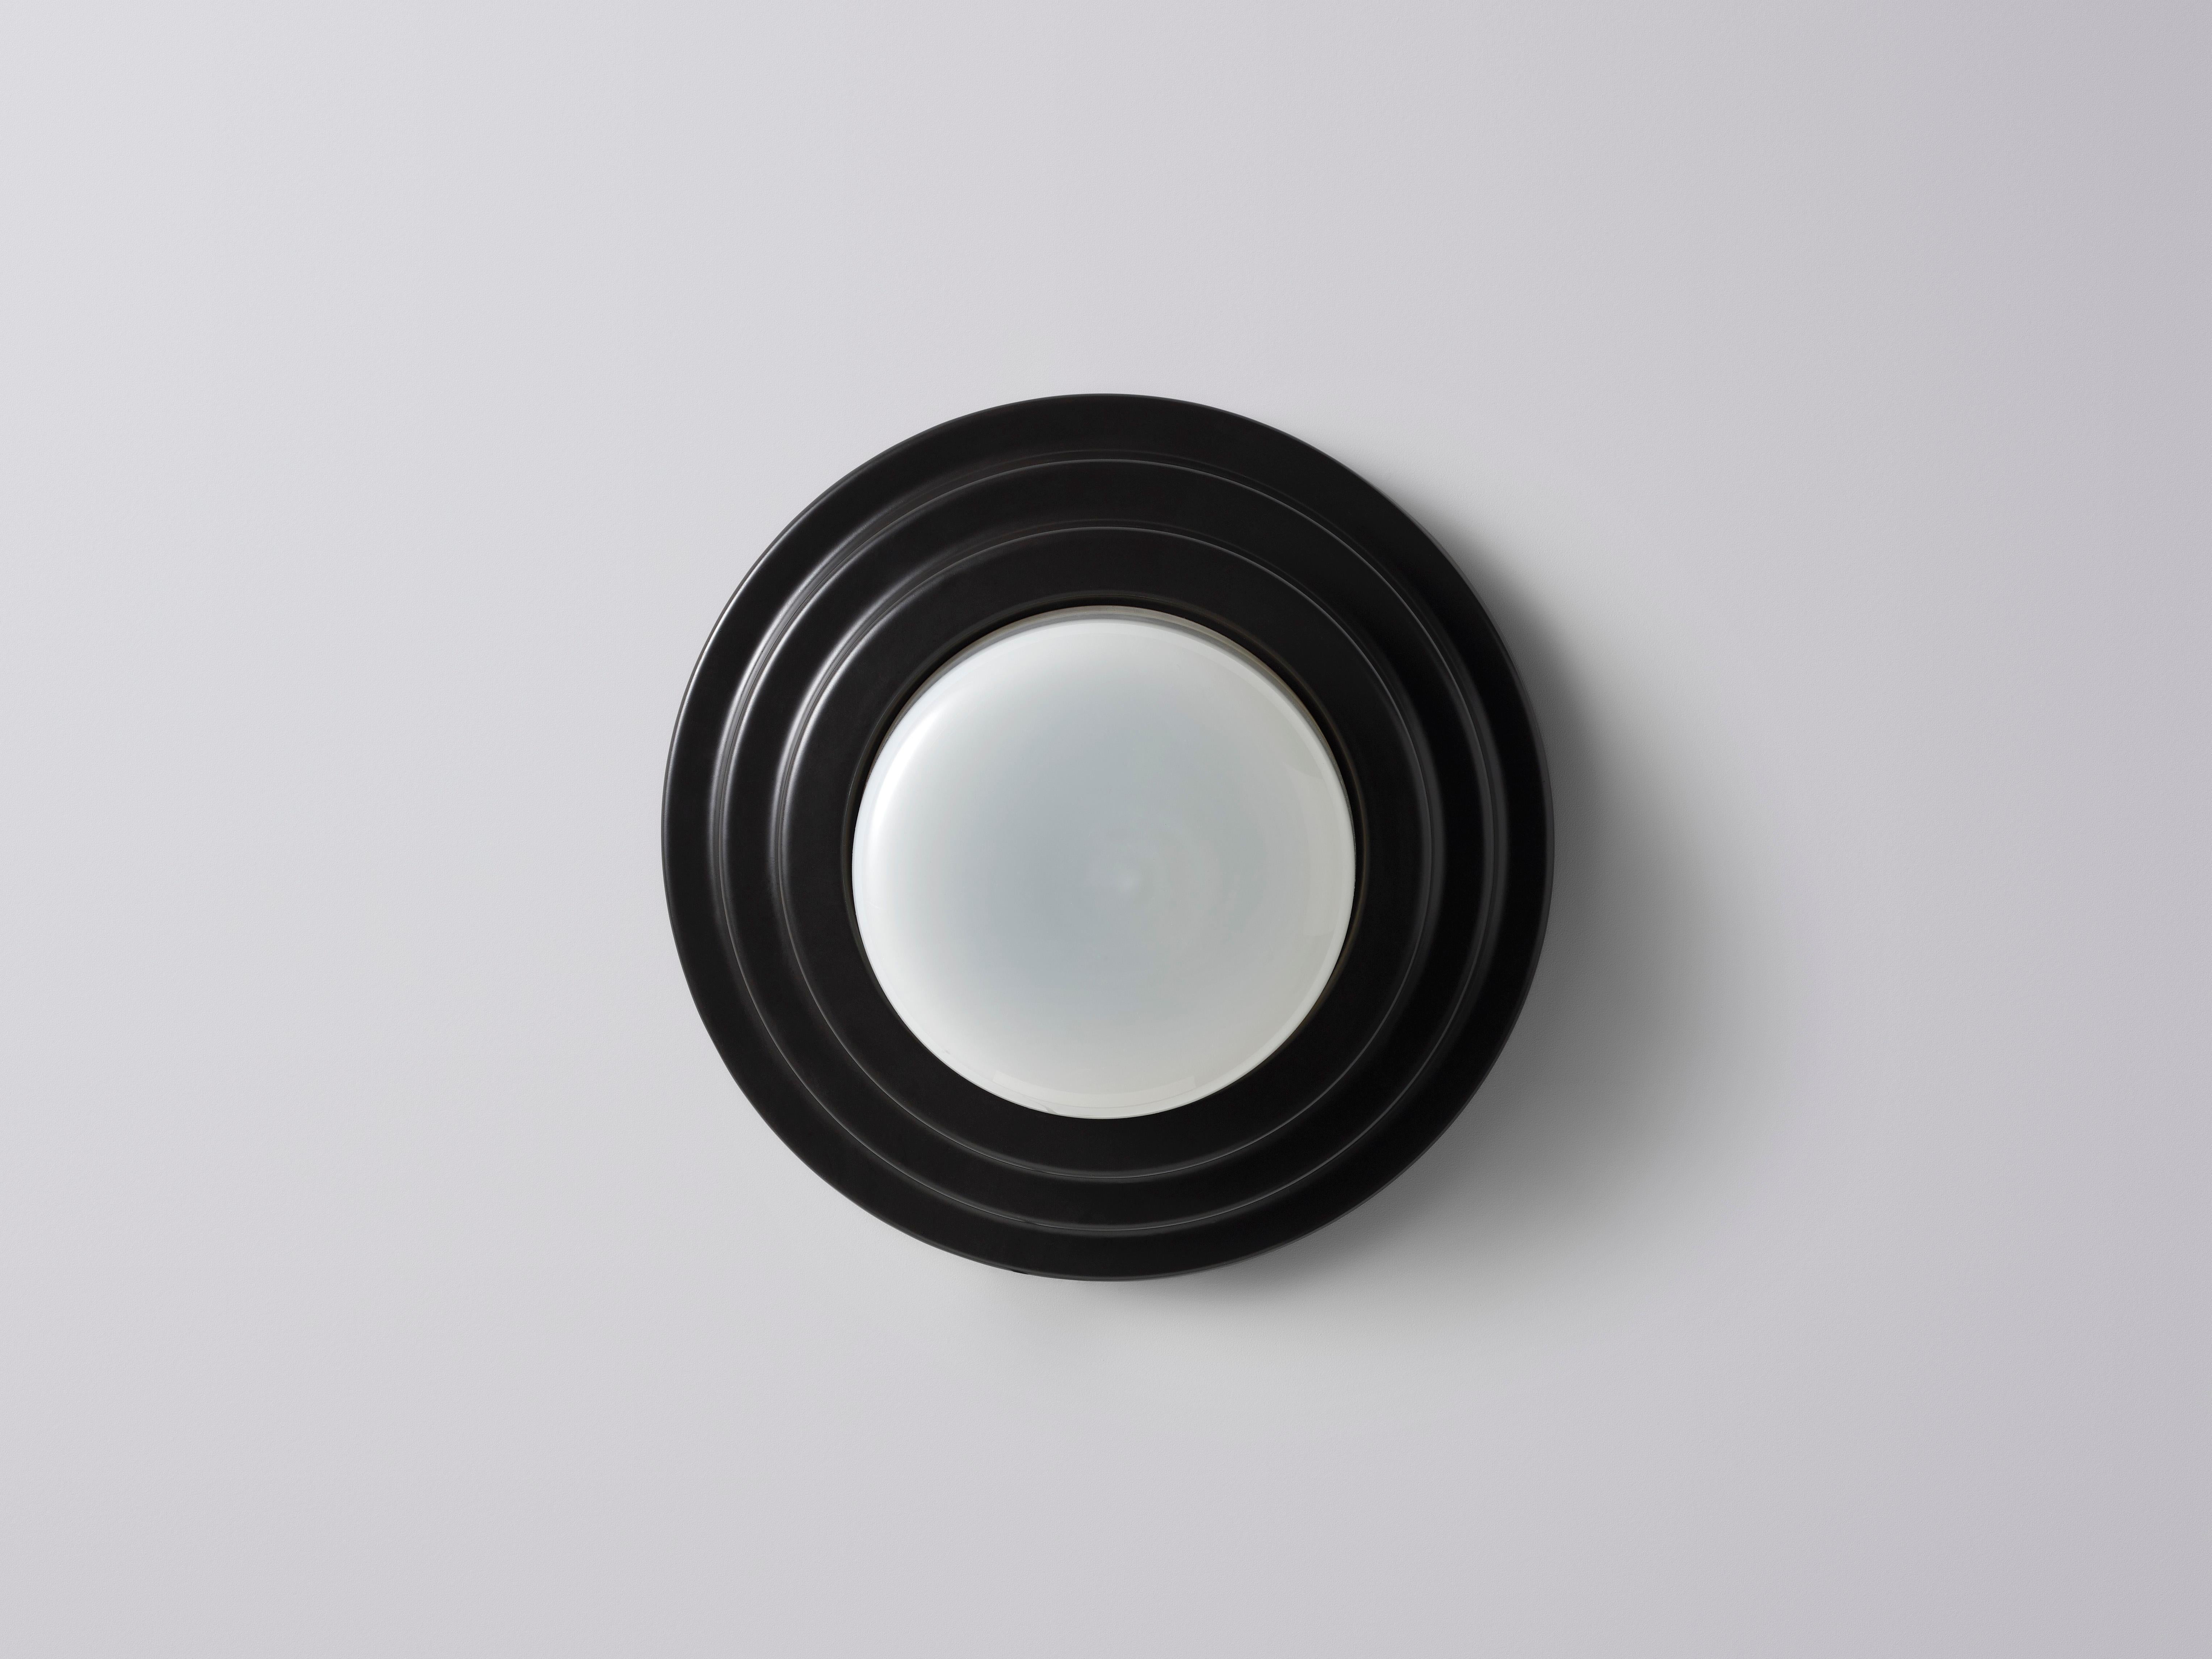 Large Black Honey Wall Sconce by Coco Flip
Dimensions: D 30 x W 30 x H 12 cm
Materials: Slip cast ceramic stoneware with blown glass. 
Weight: 4kg

Standard fixtures included
1 x ceramic G9 lamp holder
1 x dimmable 3.5W 3000K (warm white)
G9 LED